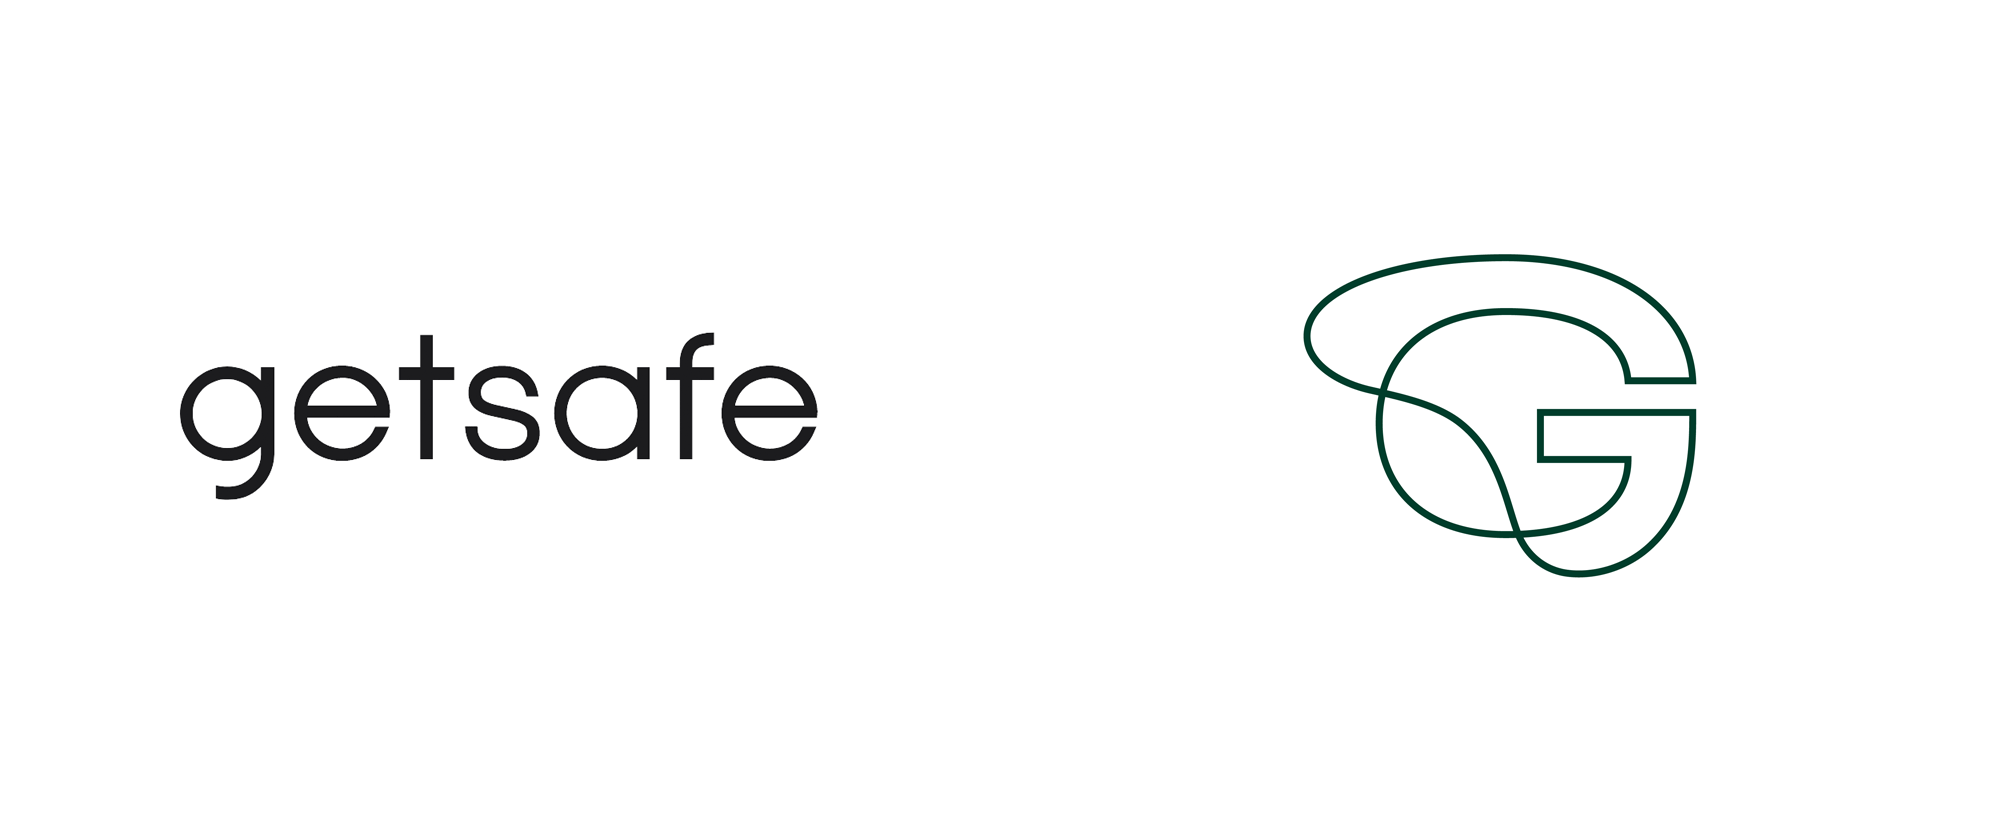 New Logo and Identity for Getsafe done In-house with DesignStudio